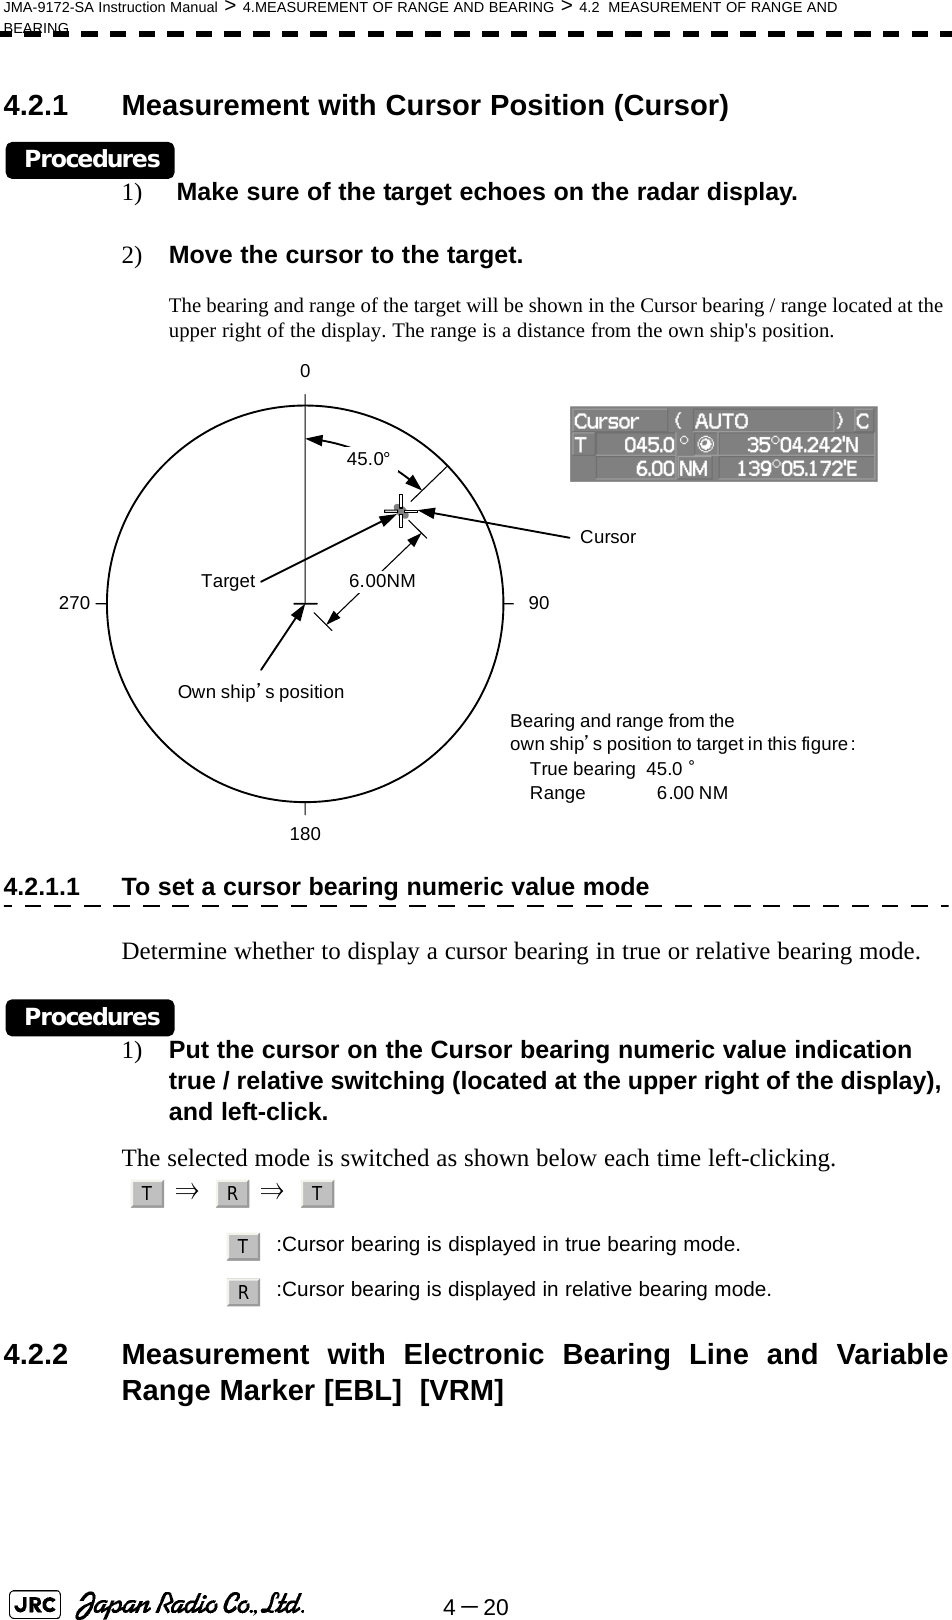 4－20JMA-9172-SA Instruction Manual &gt; 4.MEASUREMENT OF RANGE AND BEARING &gt; 4.2  MEASUREMENT OF RANGE AND BEARING4.2.1 Measurement with Cursor Position (Cursor)Procedures1)  Make sure of the target echoes on the radar display.2) Move the cursor to the target.The bearing and range of the target will be shown in the Cursor bearing / range located at the upper right of the display. The range is a distance from the own ship&apos;s position.4.2.1.1 To set a cursor bearing numeric value modeDetermine whether to display a cursor bearing in true or relative bearing mode.Procedures1) Put the cursor on the Cursor bearing numeric value indication true / relative switching (located at the upper right of the display), and left-click.The selected mode is switched as shown below each time left-clicking.  ⇒    ⇒  4.2.2 Measurement with Electronic Bearing Line and VariableRange Marker [EBL]  [VRM] :Cursor bearing is displayed in true bearing mode.:Cursor bearing is displayed in relative bearing mode.Target Cursor45.0°1800 90270 6.00NMBearing and range from theown ship’s position to target in this figure :True bearing  45.0 °Range  6.00 NMOwn ship’s positionT R TTR